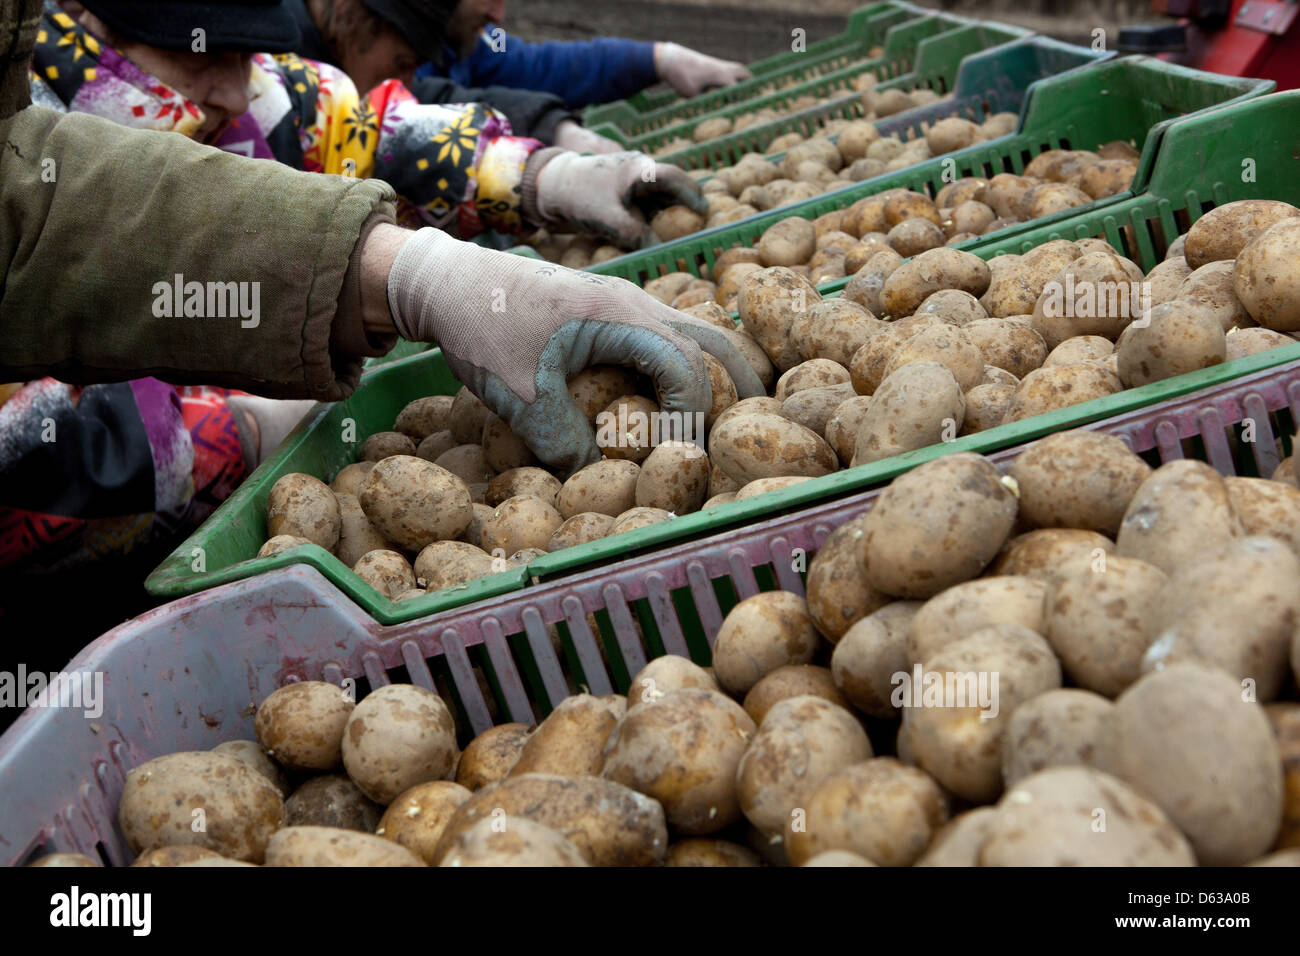 Spring planting potatoes, Farmers with potatoes in boxes Stock Photo